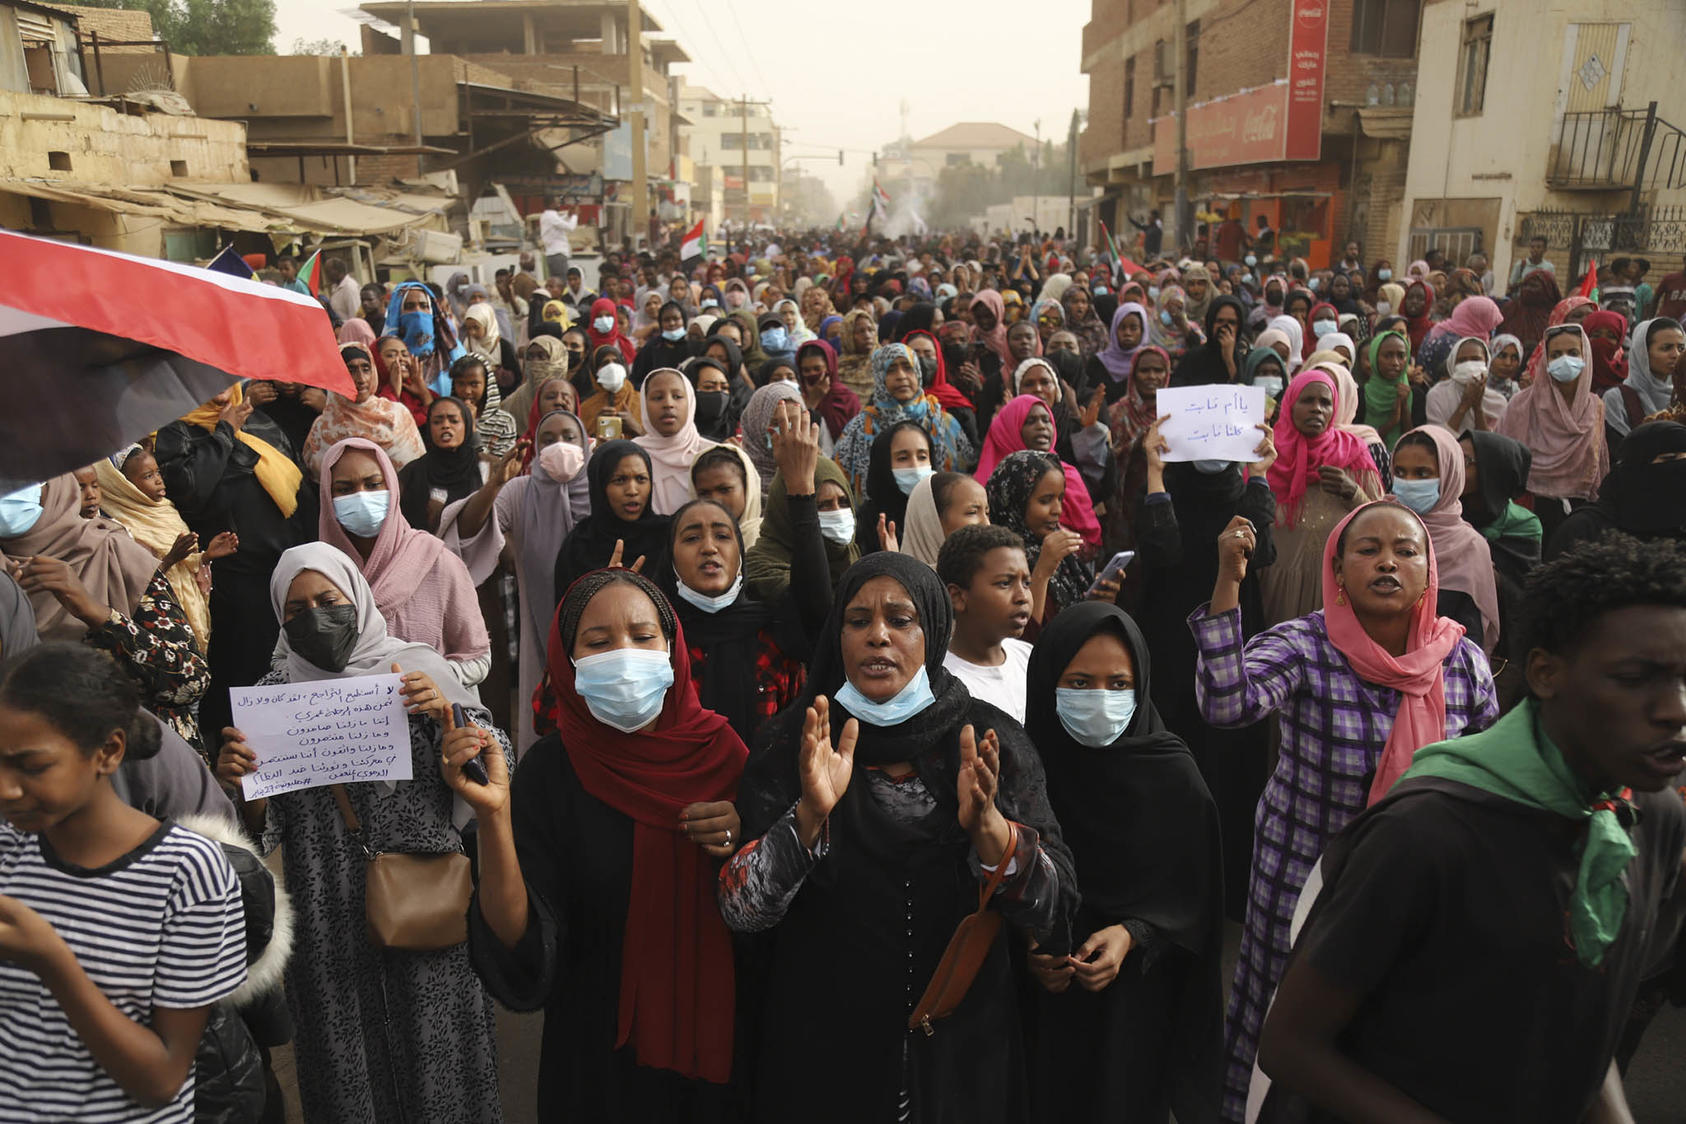 Sudanese in Khartoum protest the killing of a prodemocracy demonstrator in January. Hundreds of “resistance committees” are at the center of organizing continued nonviolent actions demanding civilian rule. (Faiz Abubakar Muhamed/The New York Times)